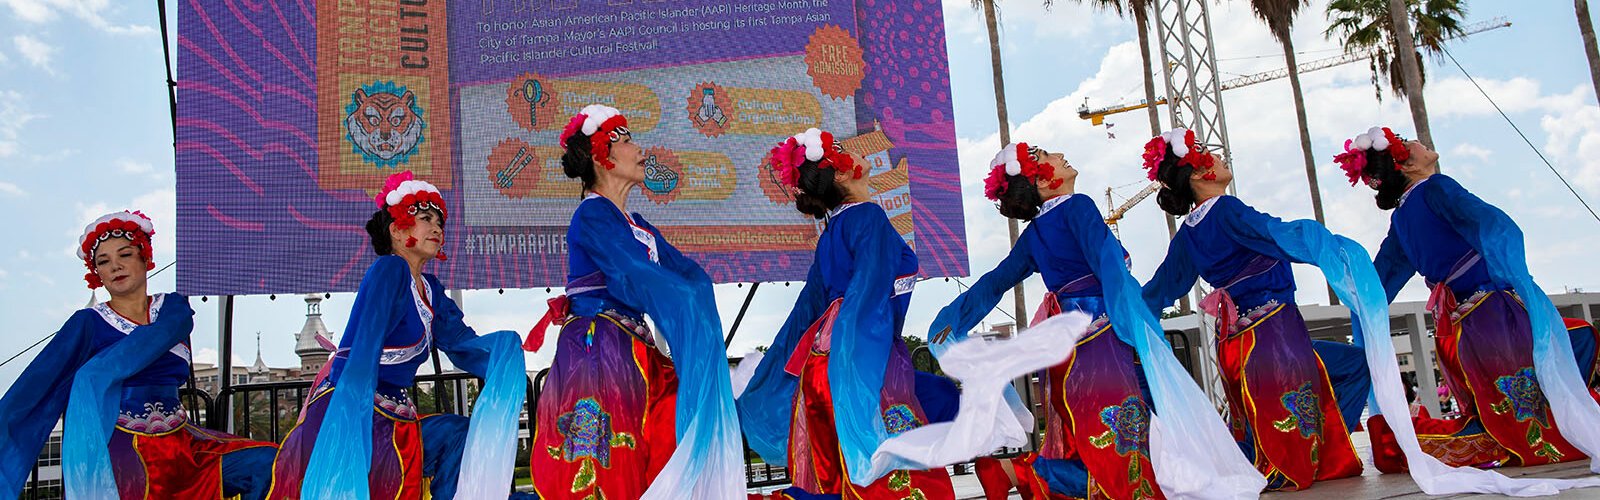 Tampa's Asian Pacific Islander Cultural Festival featured an afternoon of live performances, food and culture.